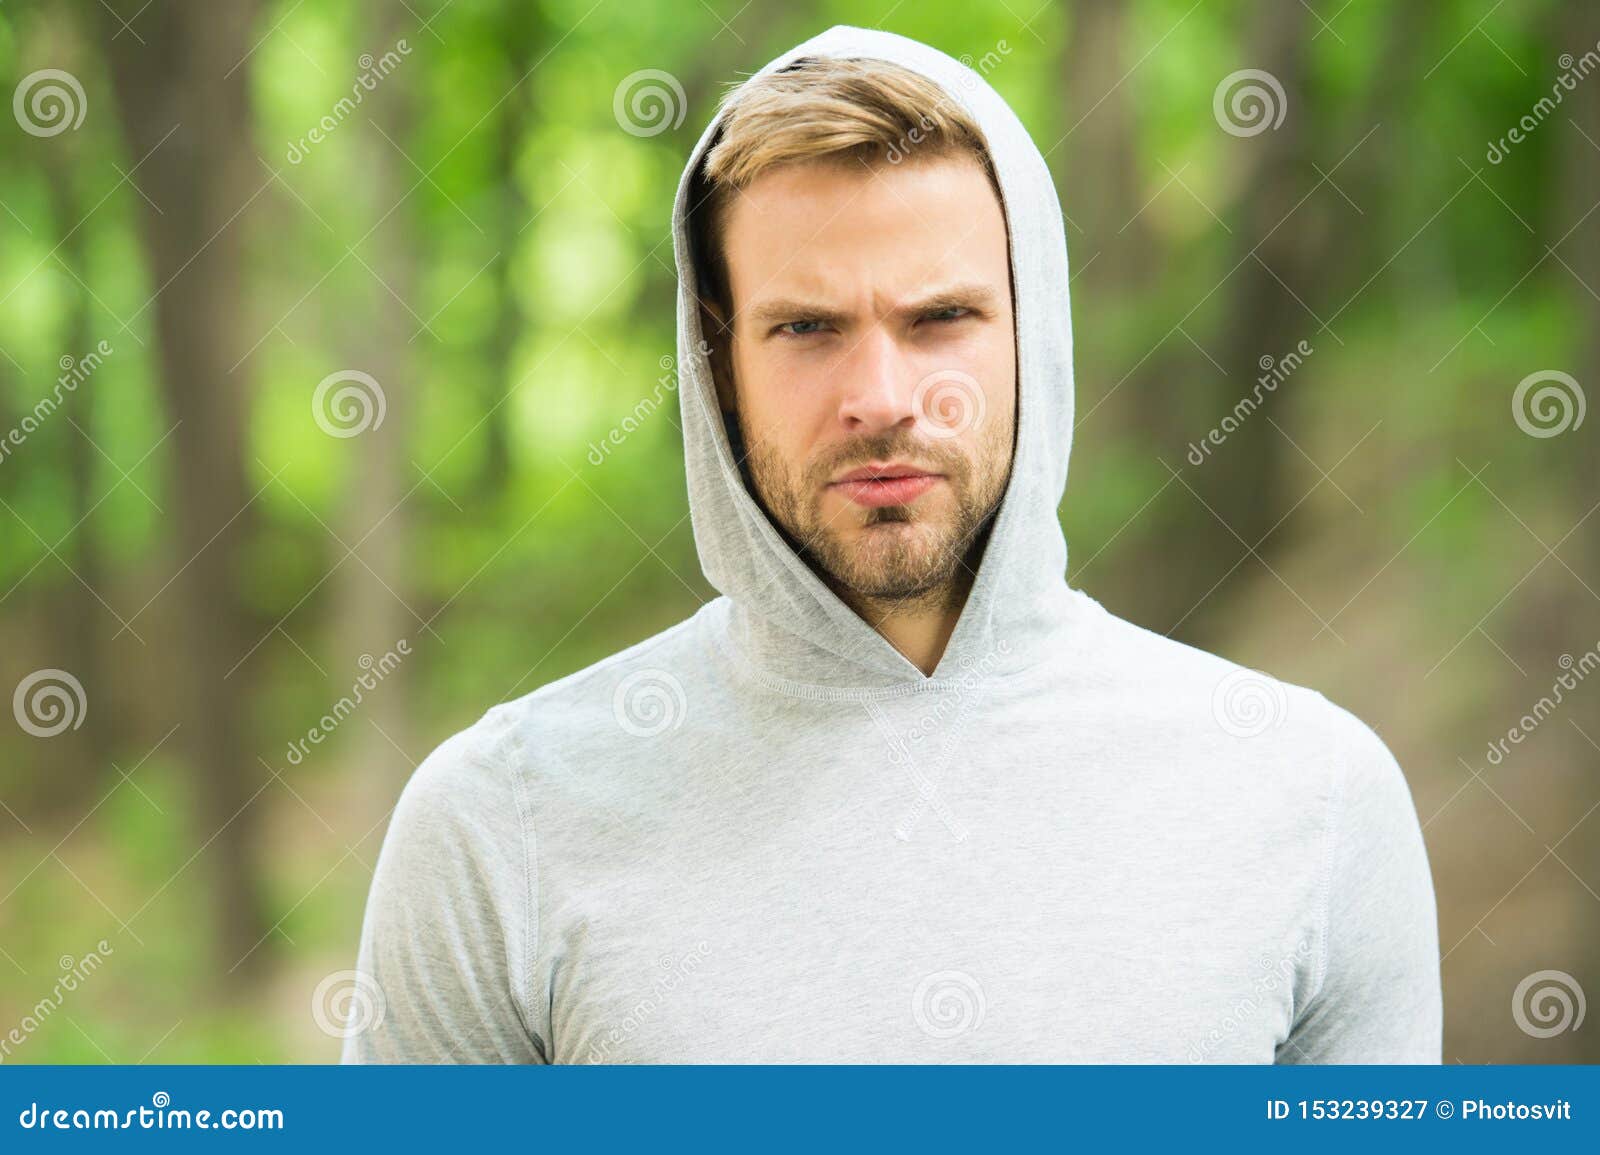 macho man. man in hood. casual style. male fashion. unshaven guy outdoor. seriousness and masculinity. sportswear